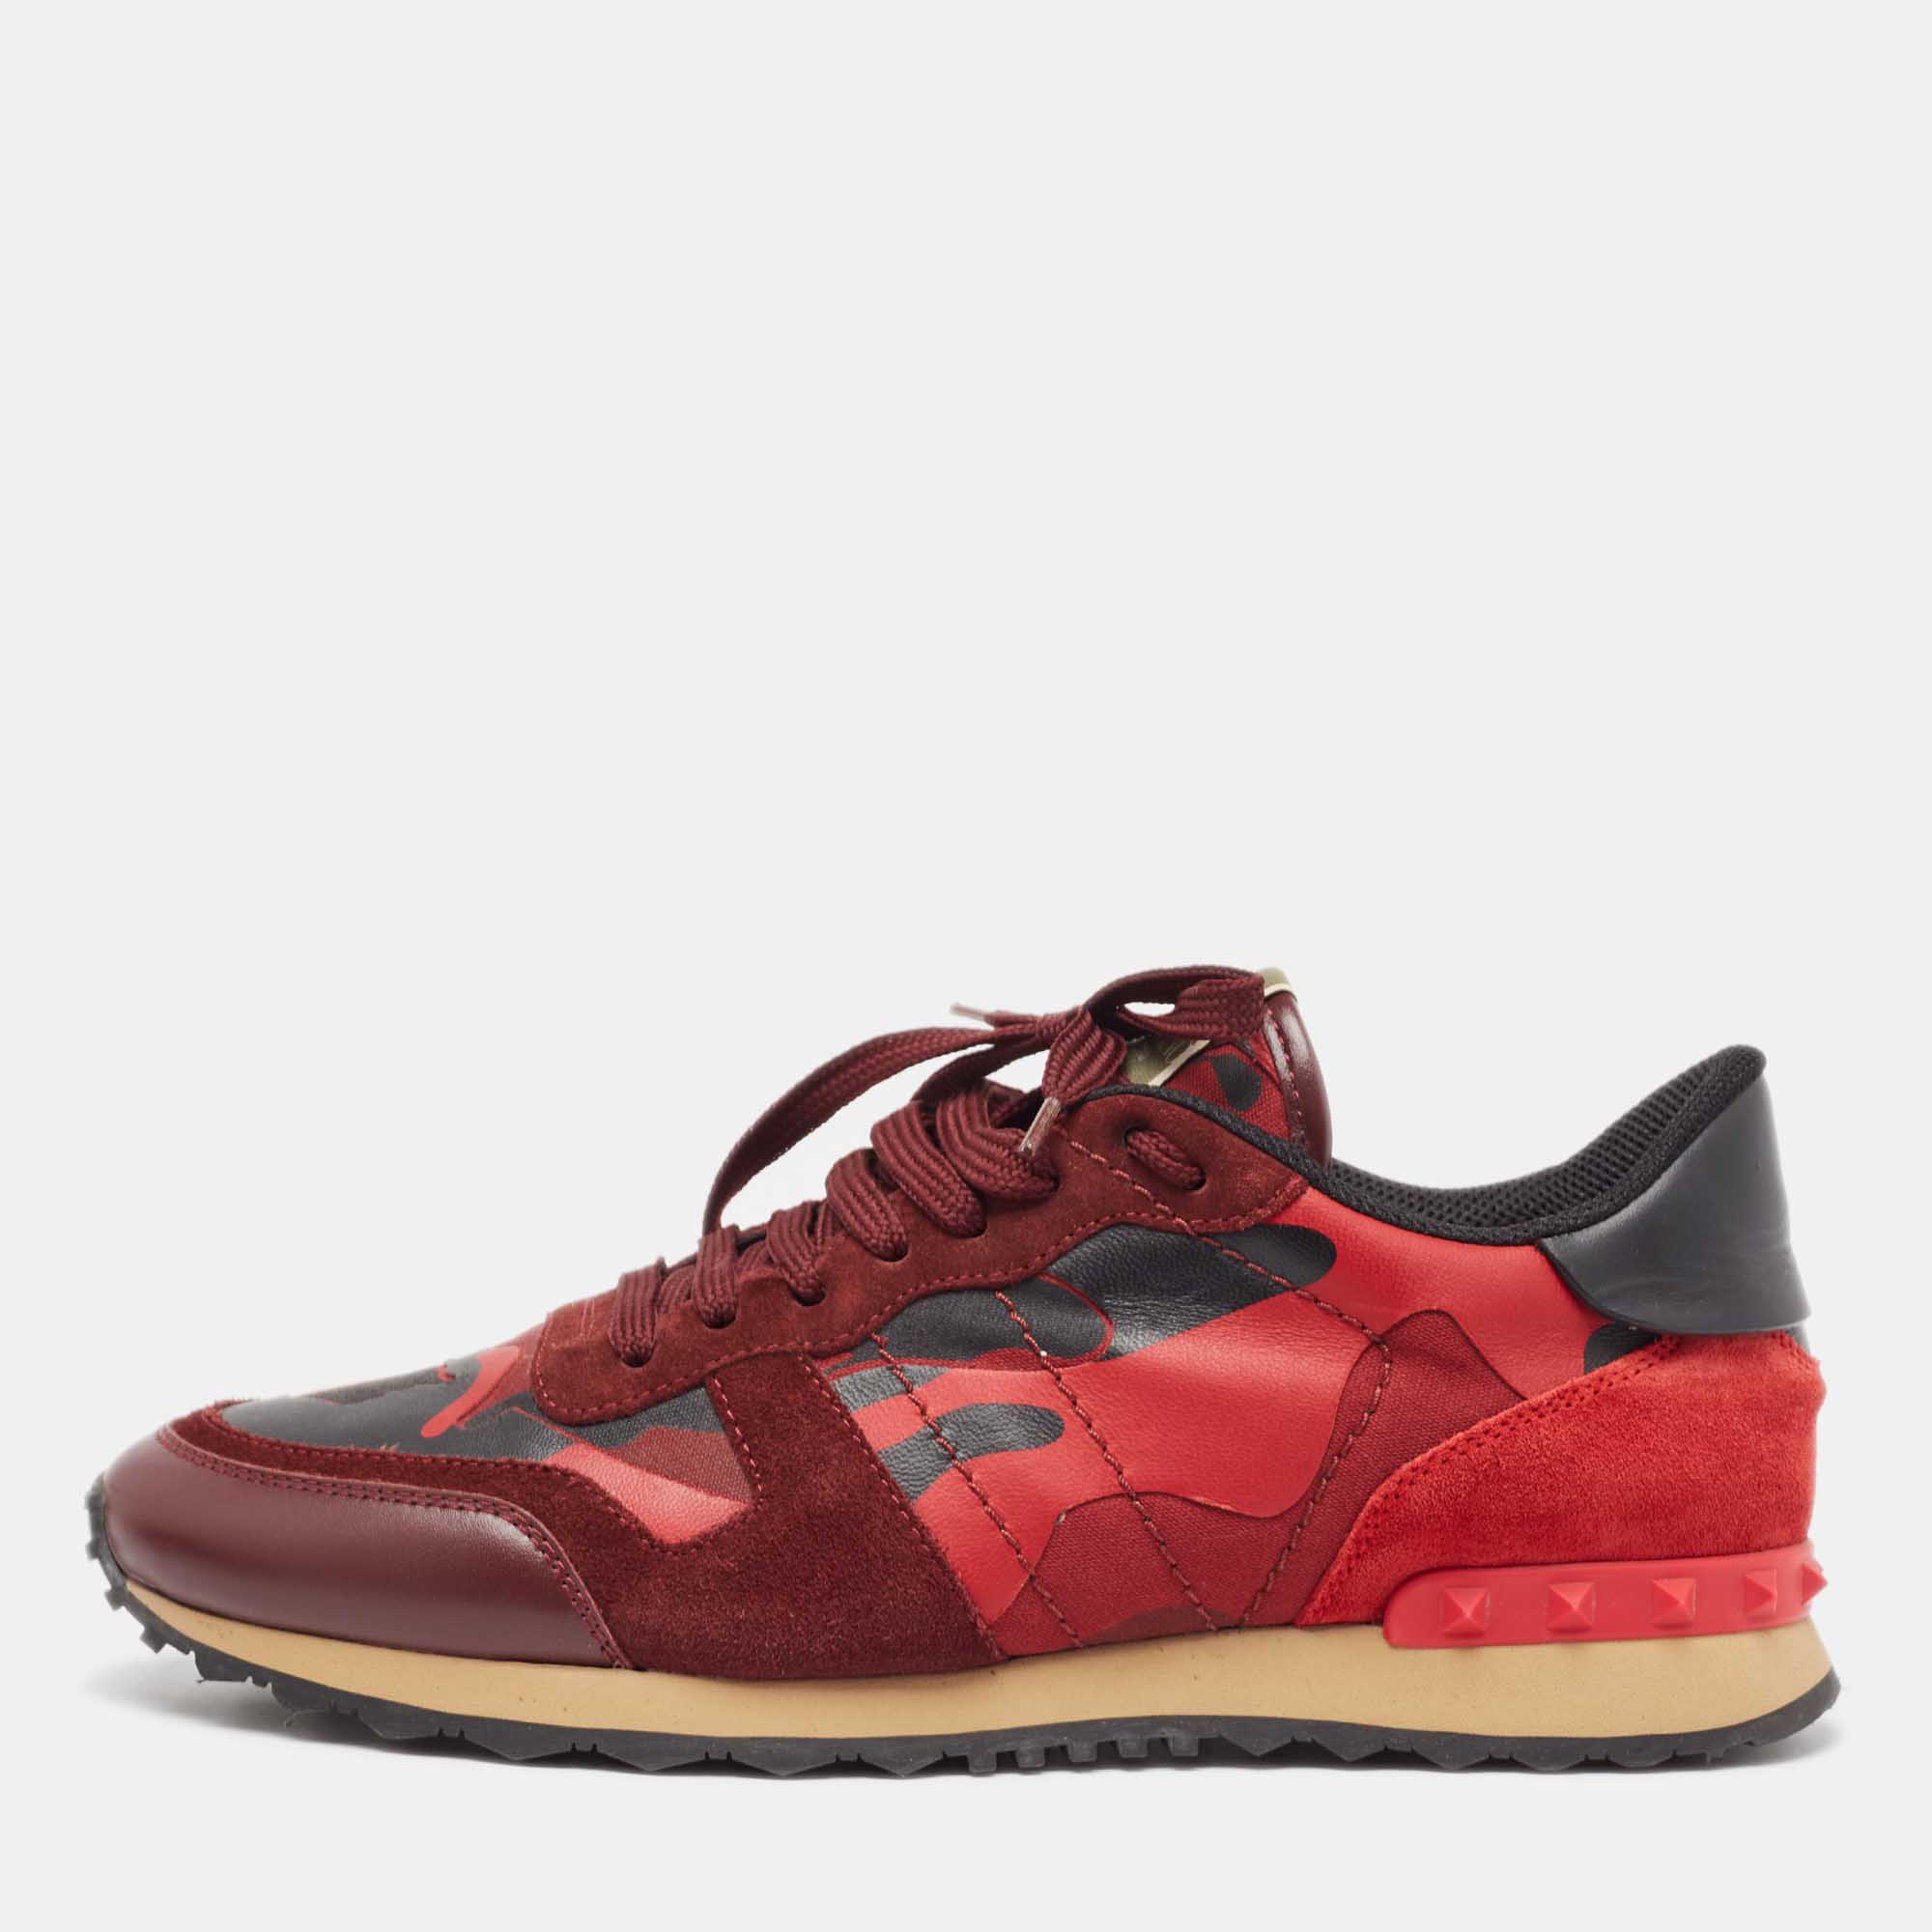 Valentino red camouflage leather,canvas and suede rockrunner sneakers size 43